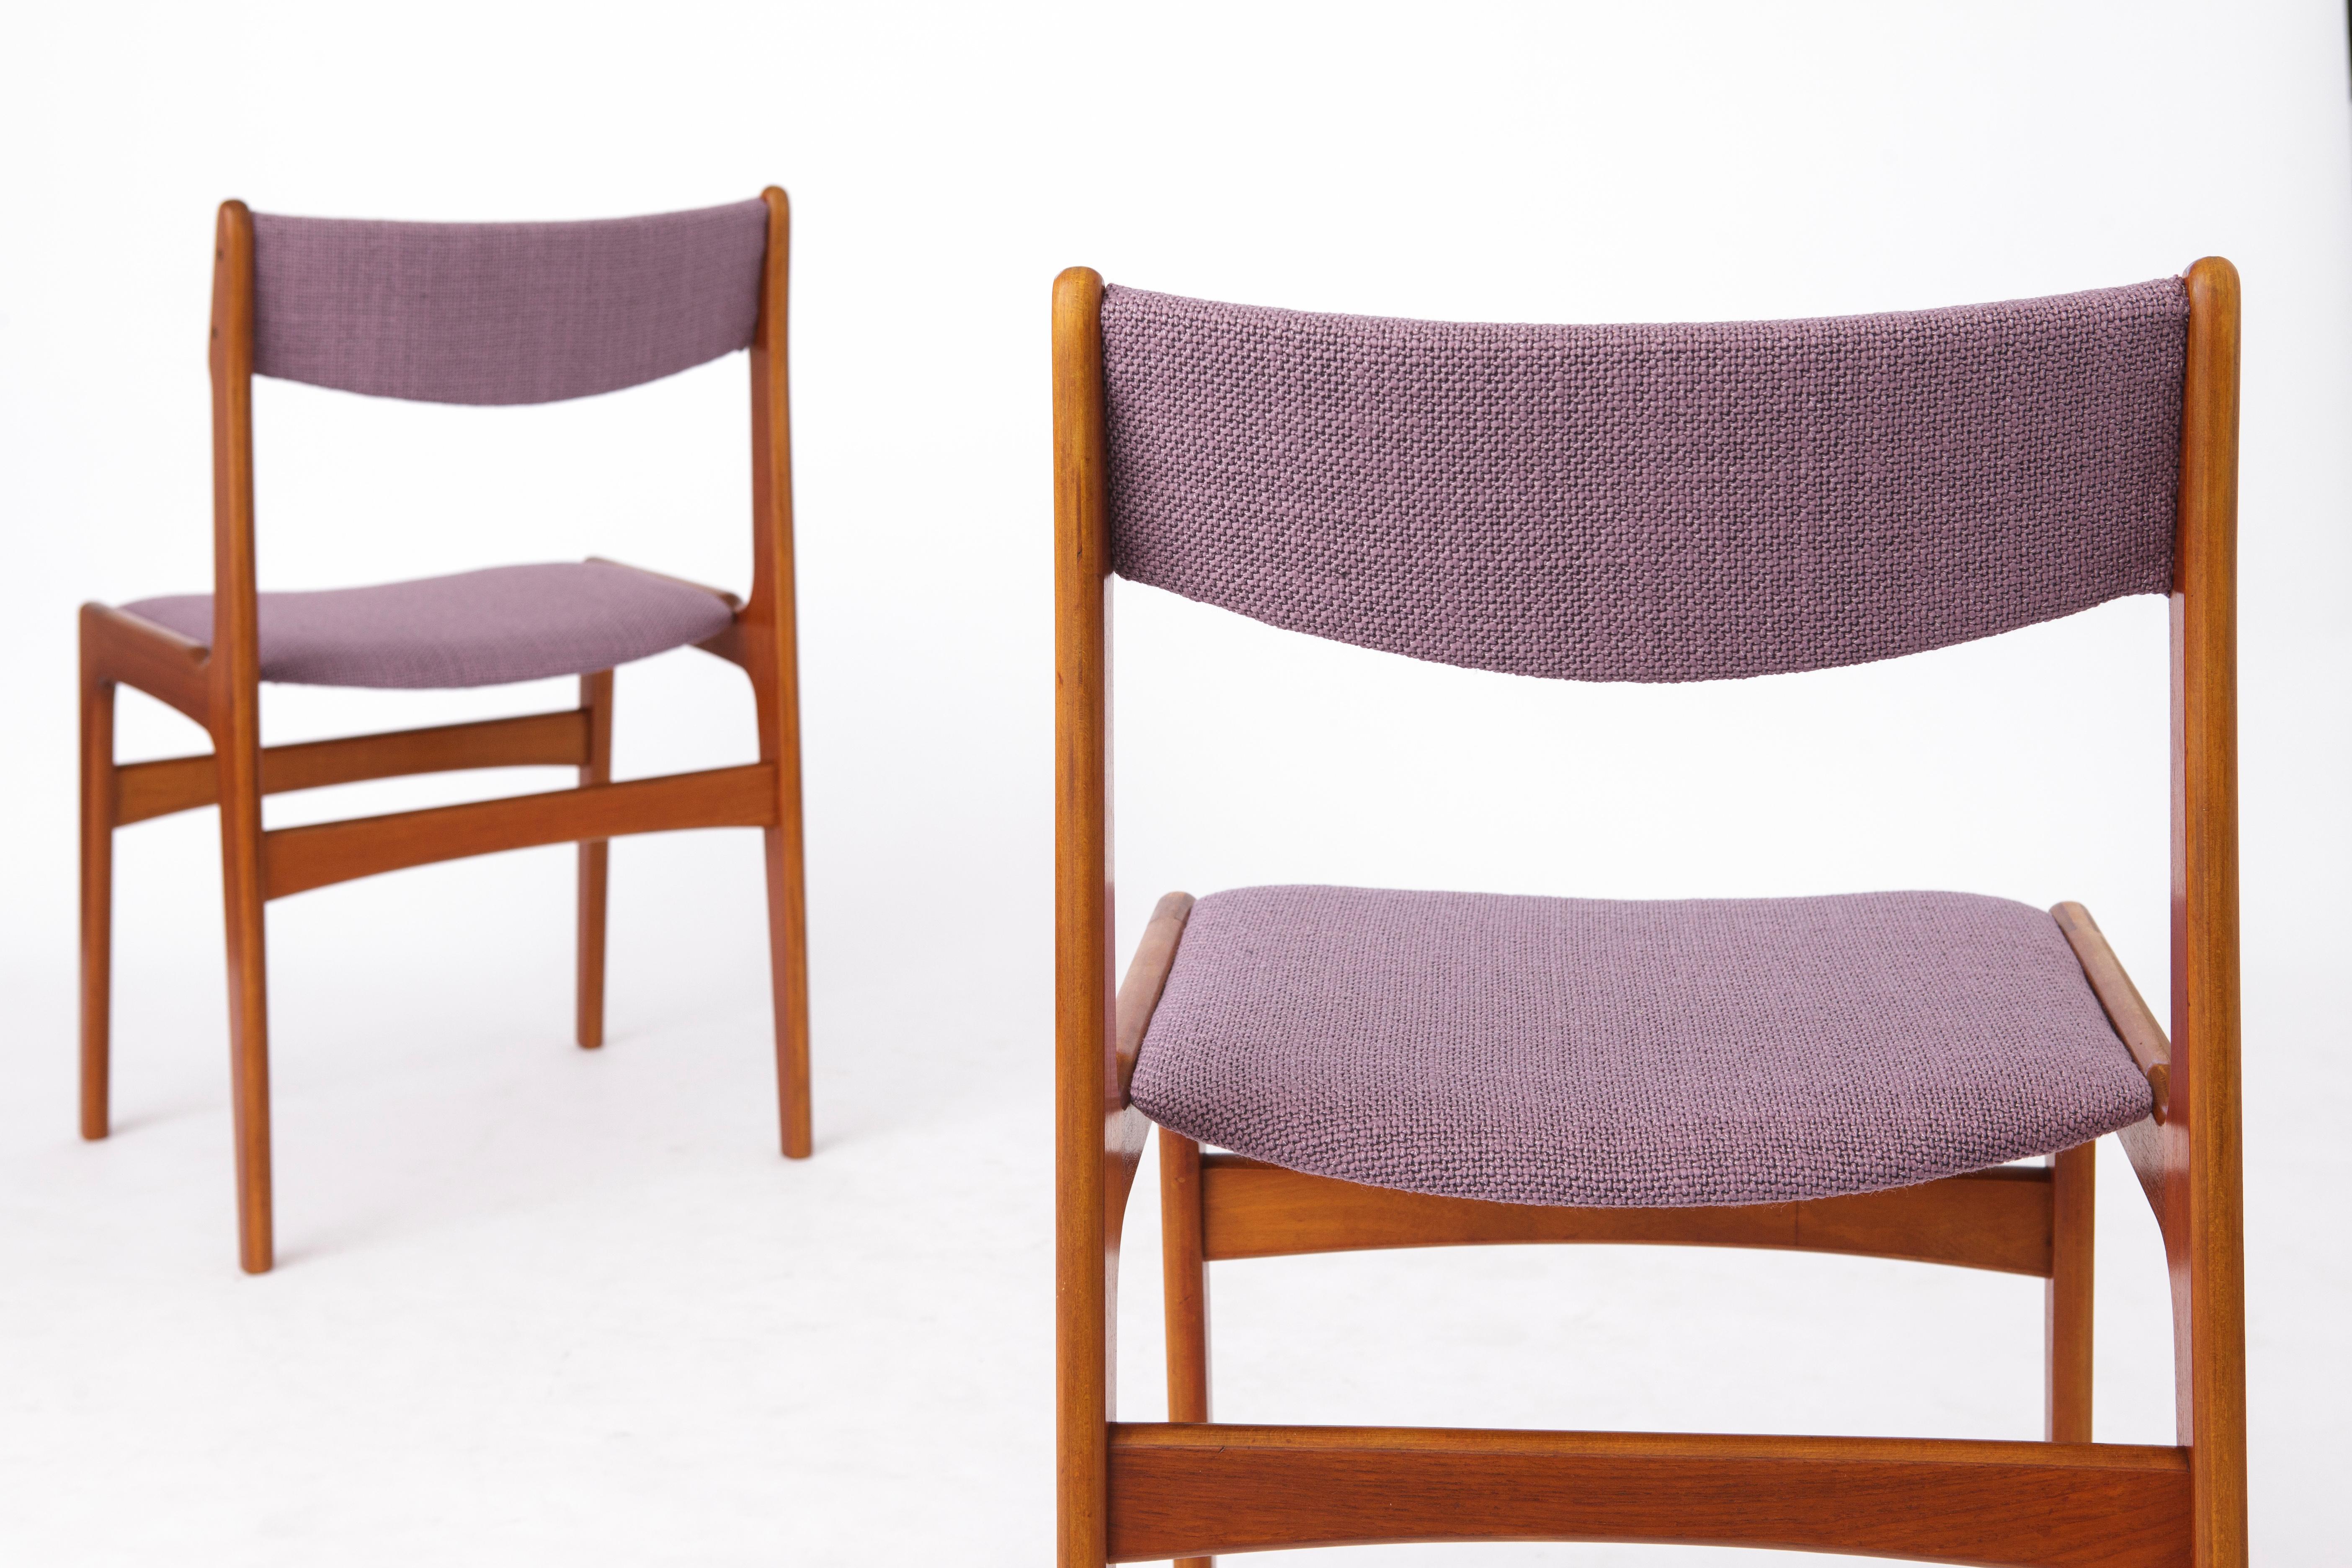 Polished Pair mid century vintage chairs, 1960s, Danish